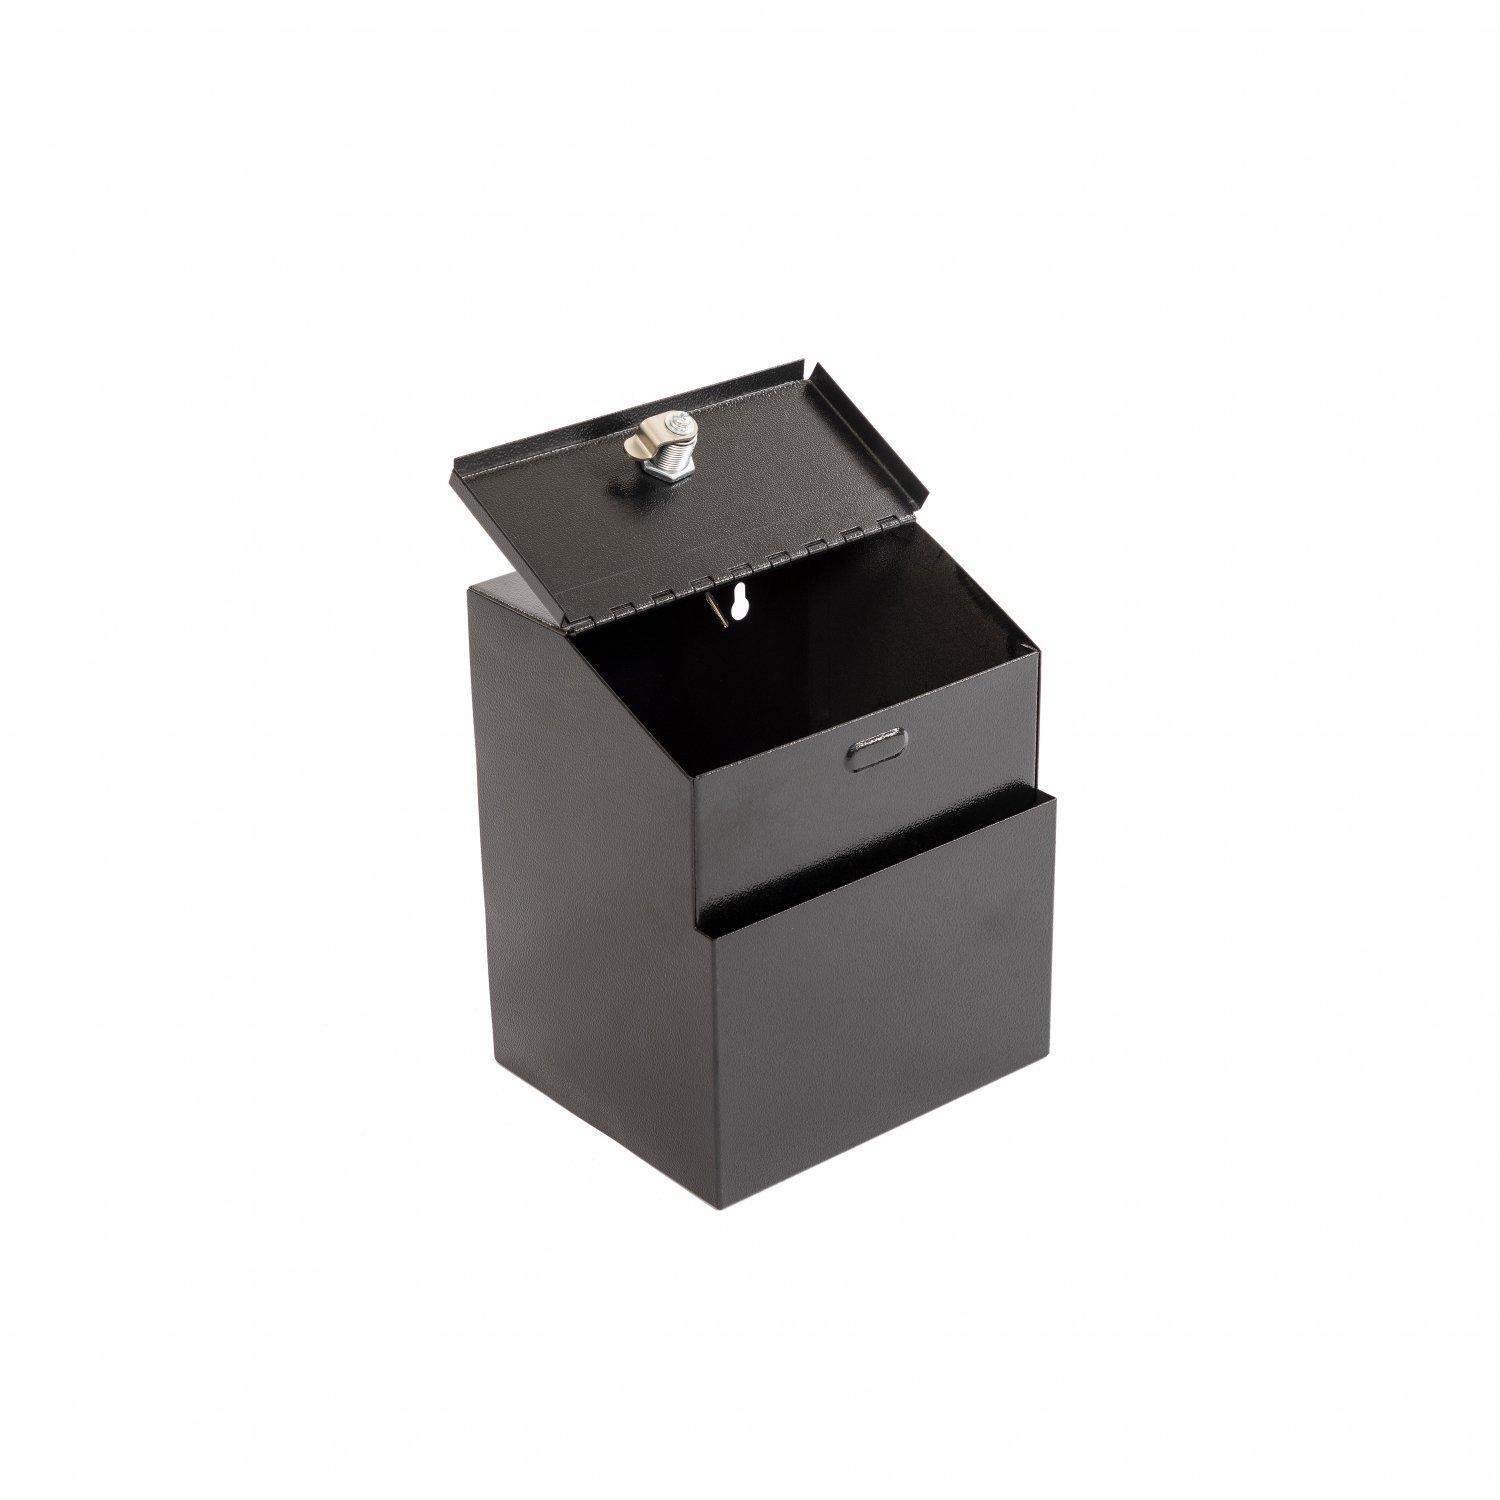 Donation Box Key Drop Box Adir Wall Mountable Steel Suggestion Box with Lock Ballot Box Collection Box Red with 25 Suggestion Cards 